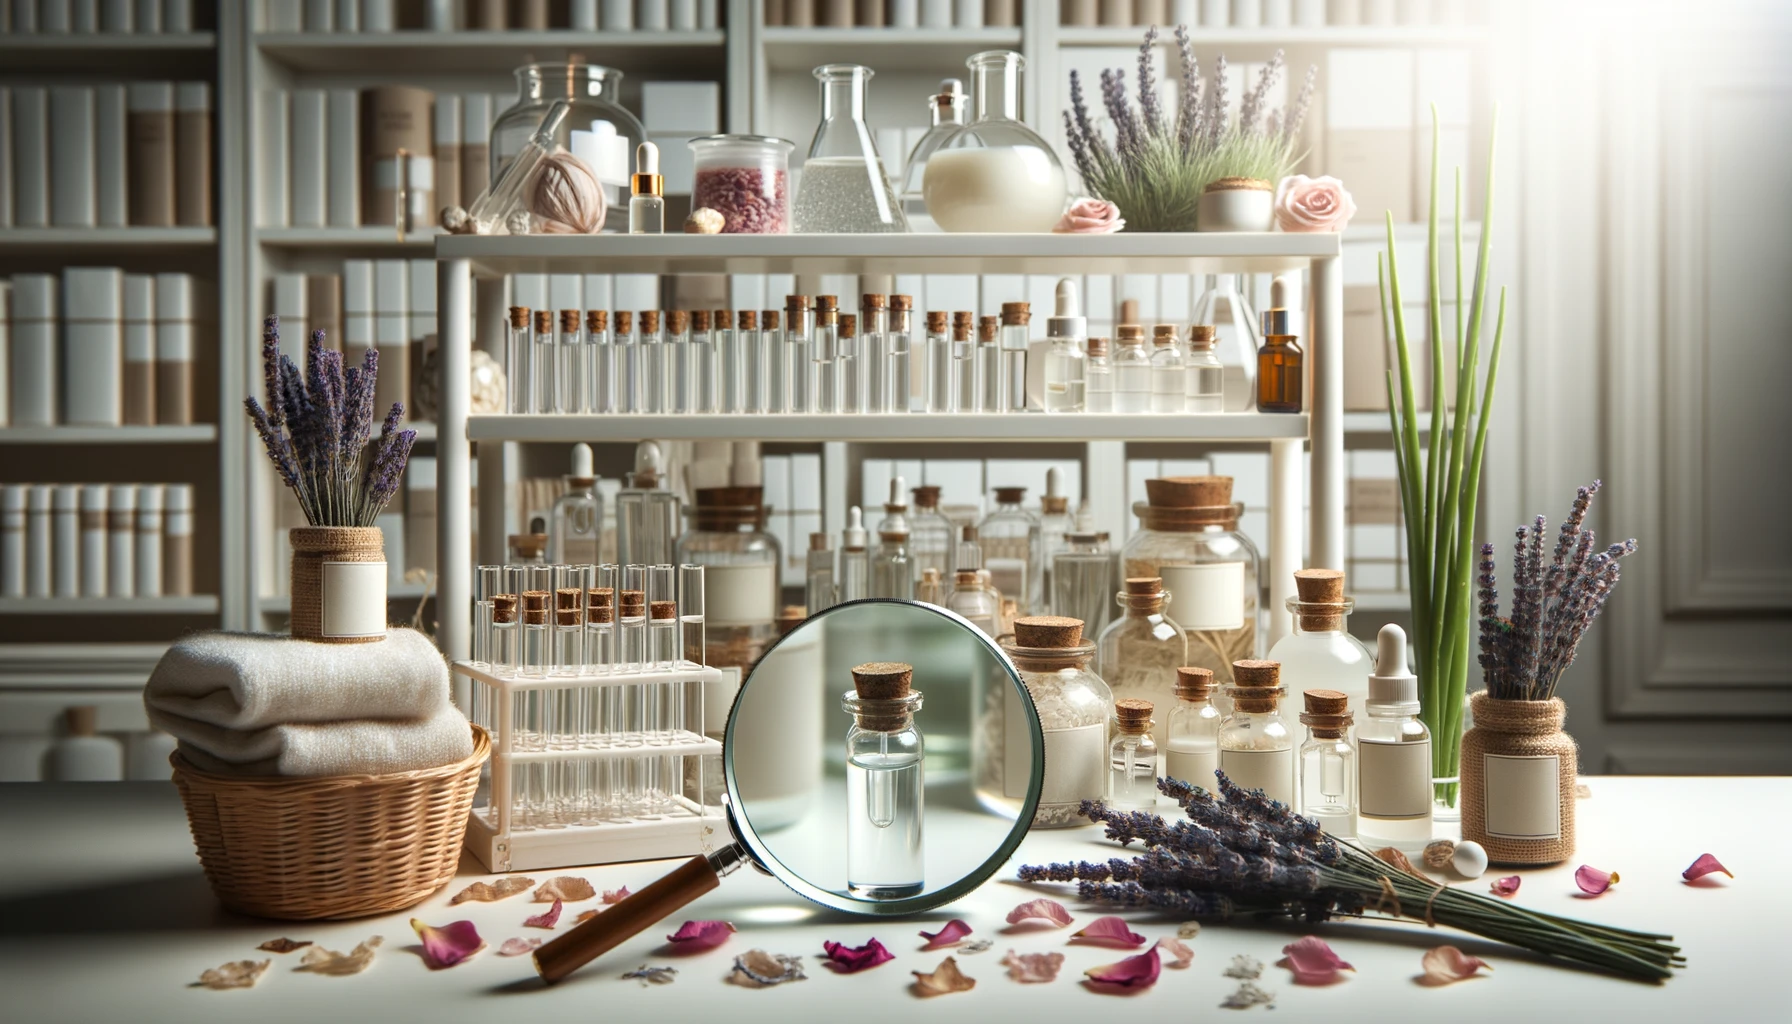 laboratory with shelves of test tubes containing clear liquids. Natural ingredients like lavender, rose petals, and aloe vera are spread on a white table. In the foreground, a magnifying glass focuses on a skincare product label, emphasizing scientific analysis